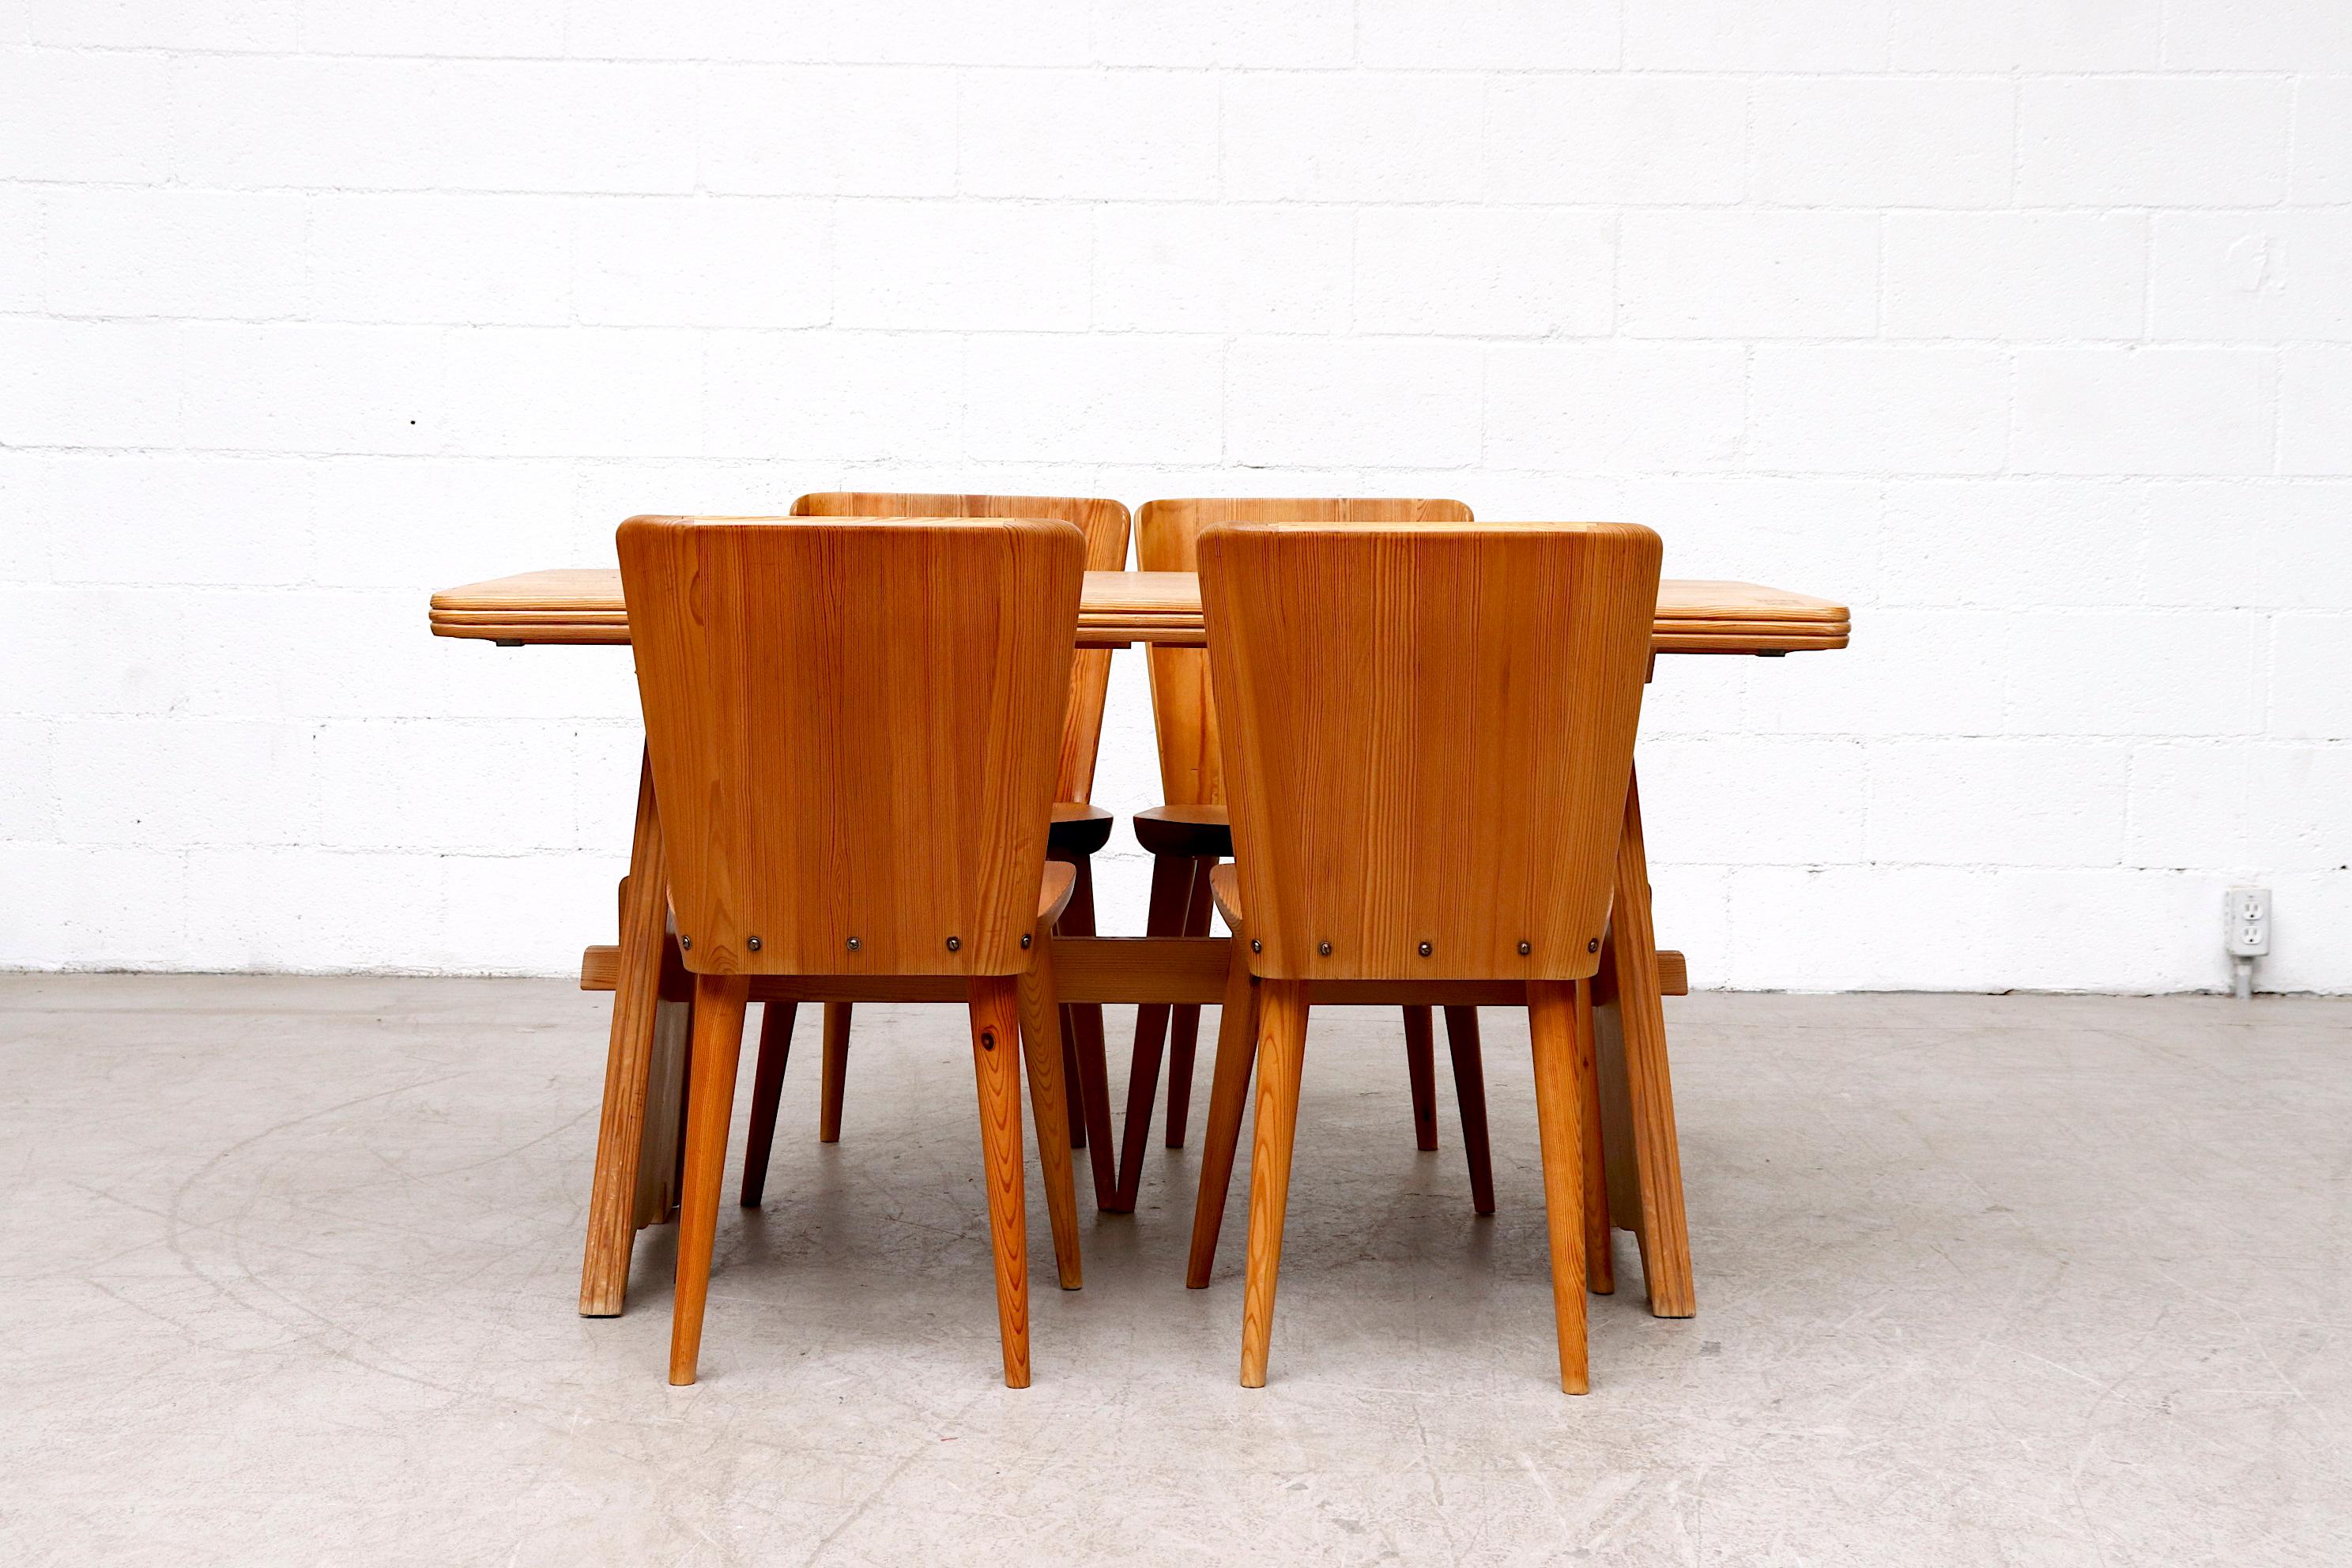 Beautiful Göran Malmvall midcentury pine trestle dining table with double leaf extensions. In original condition with wear consistent with its age and use. 